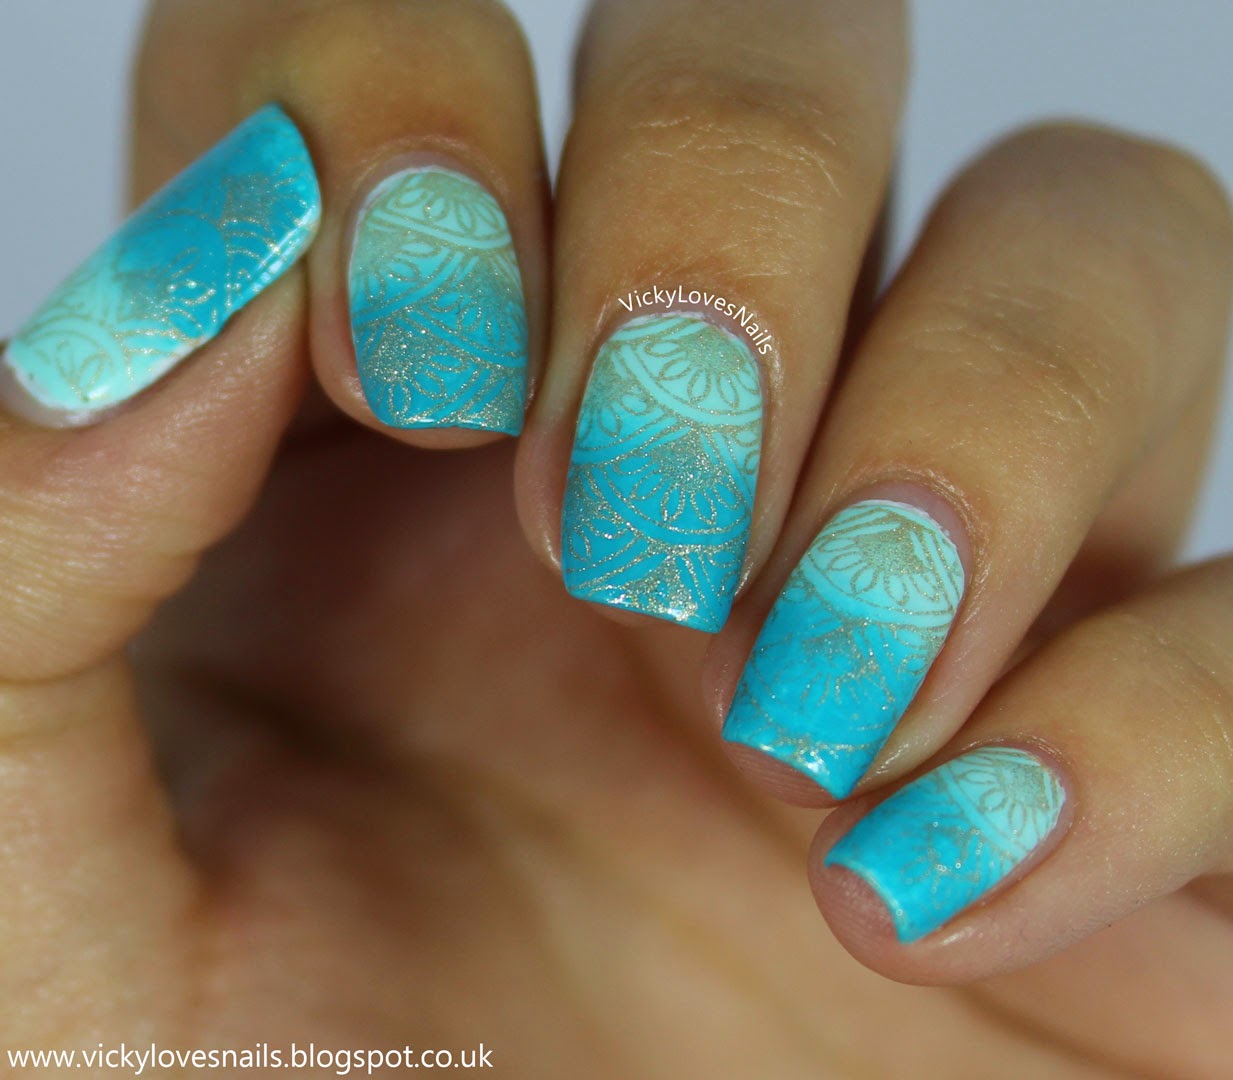 Vicky Loves Nails!: 52 Week Pick & Mix Challenge: Two Colour Gradient/Teal